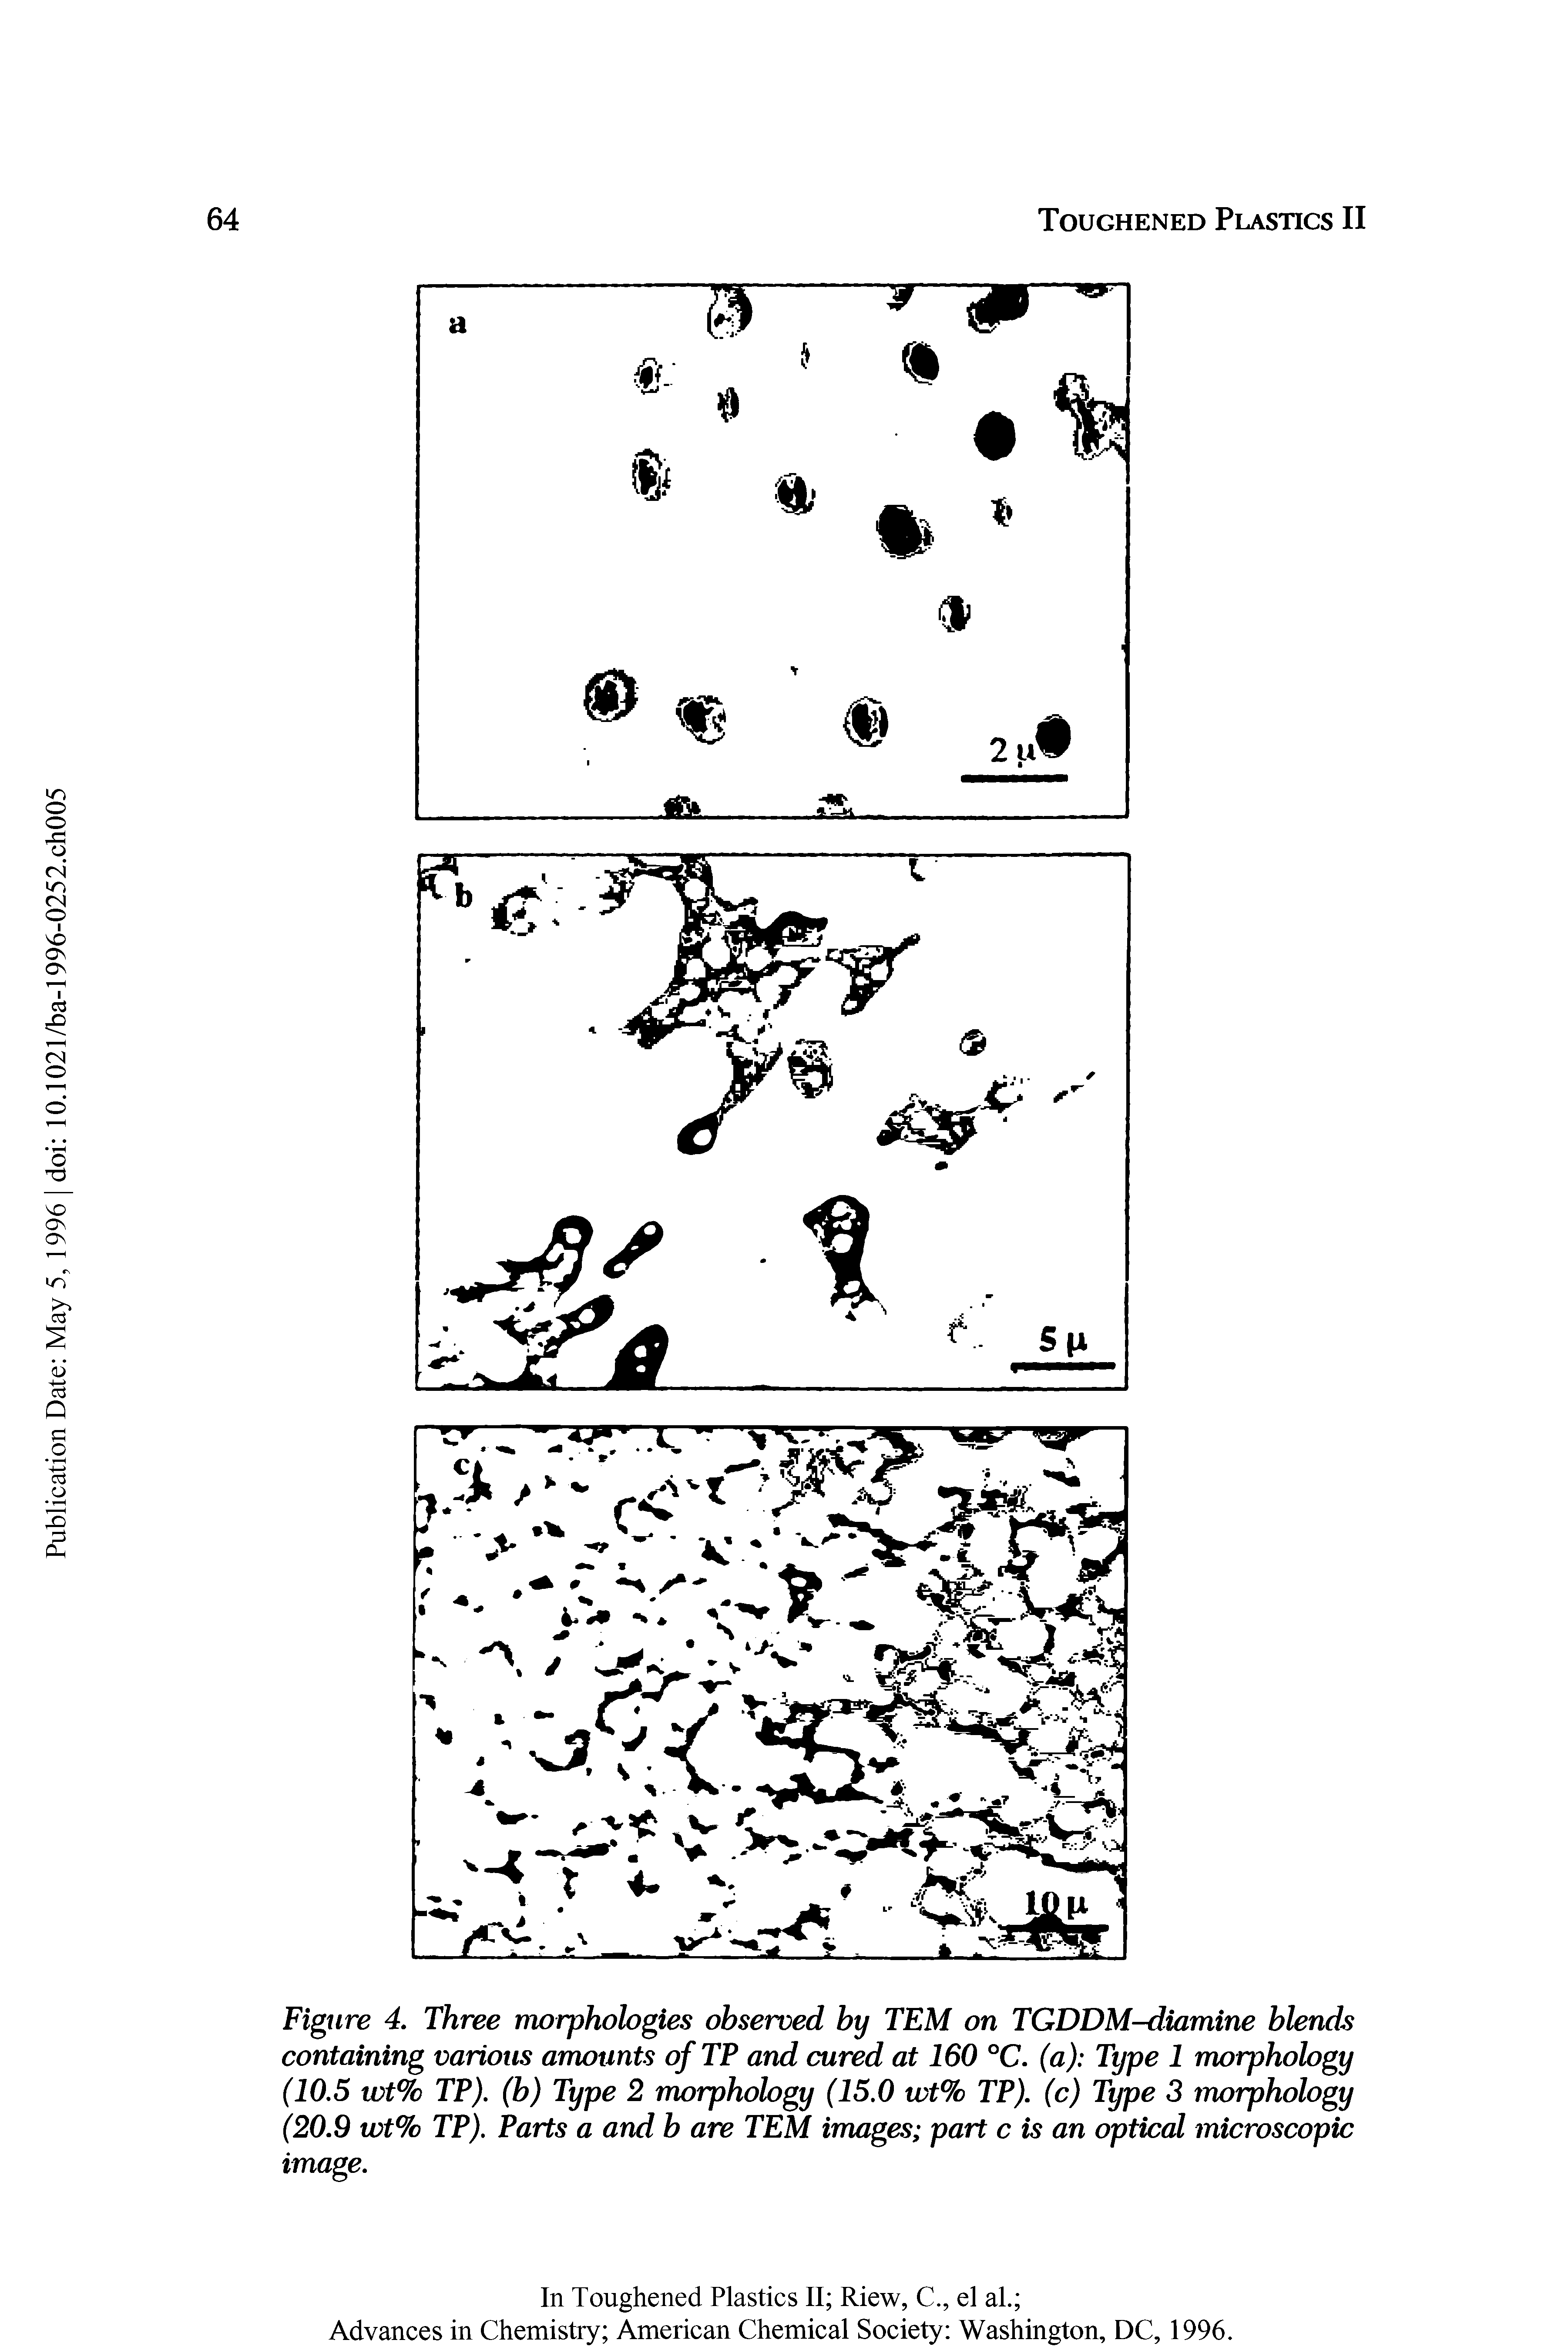 Figure 4. Three morphologies observed by TEM on TGDDM-diamine blends containing various amounts of TP and cured at 160 °C. (a) Type 1 morphology (10.5 wt% TP), (b) Type 2 morphology (15.0 wt% TP), (c) Type 3 morphology (20.9 wt% TP). Parts a and b are TEM images part c is an optical microscopic image.